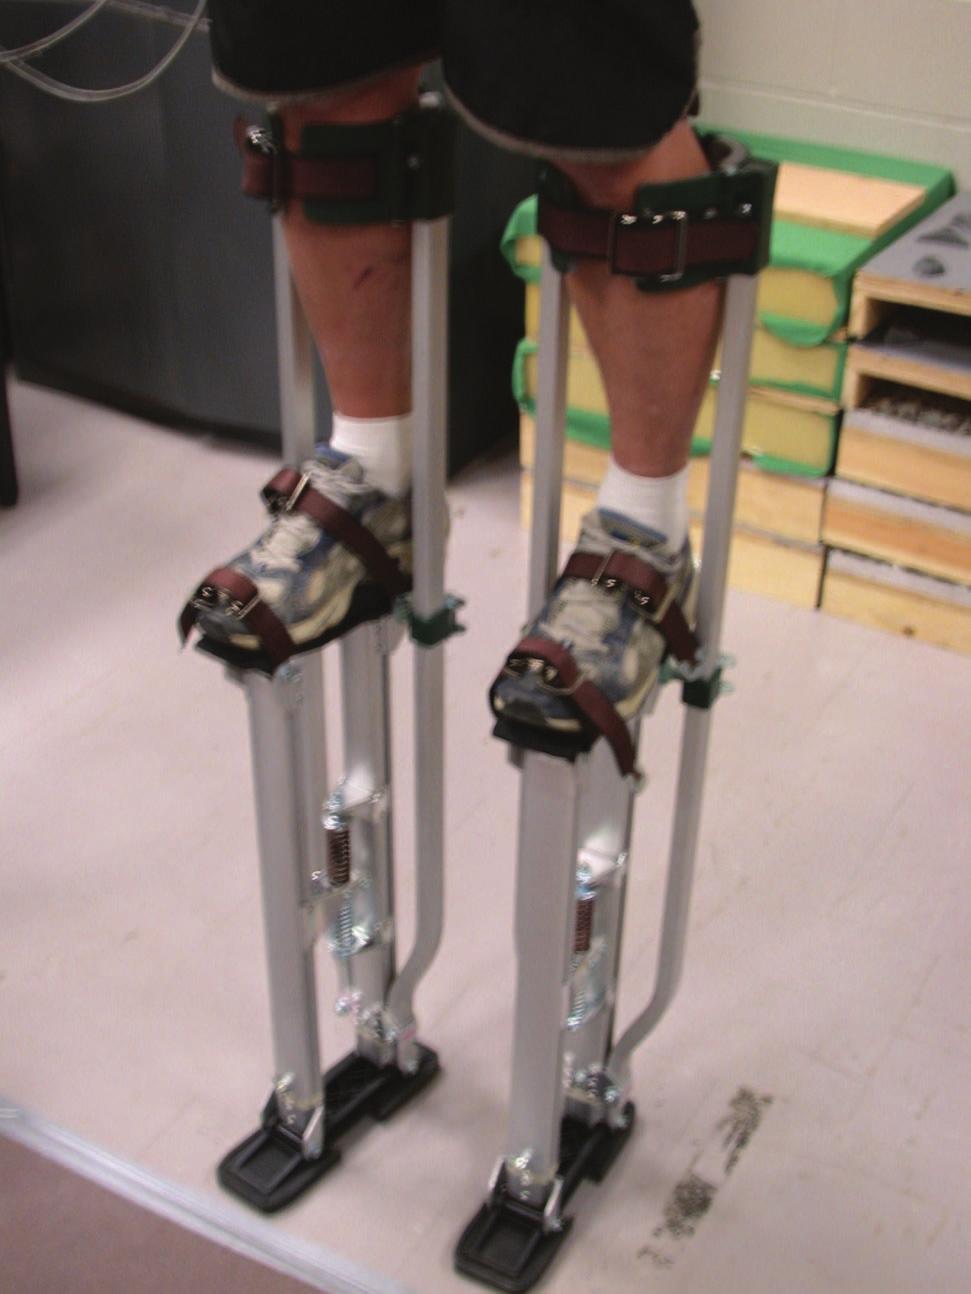 Ergonomics 1121 start point was approximately 1 m off the GaitRite 1 carpet. Each participant was tested for 30 stilt walking trials with 5-min seated rest after every 10 trials.